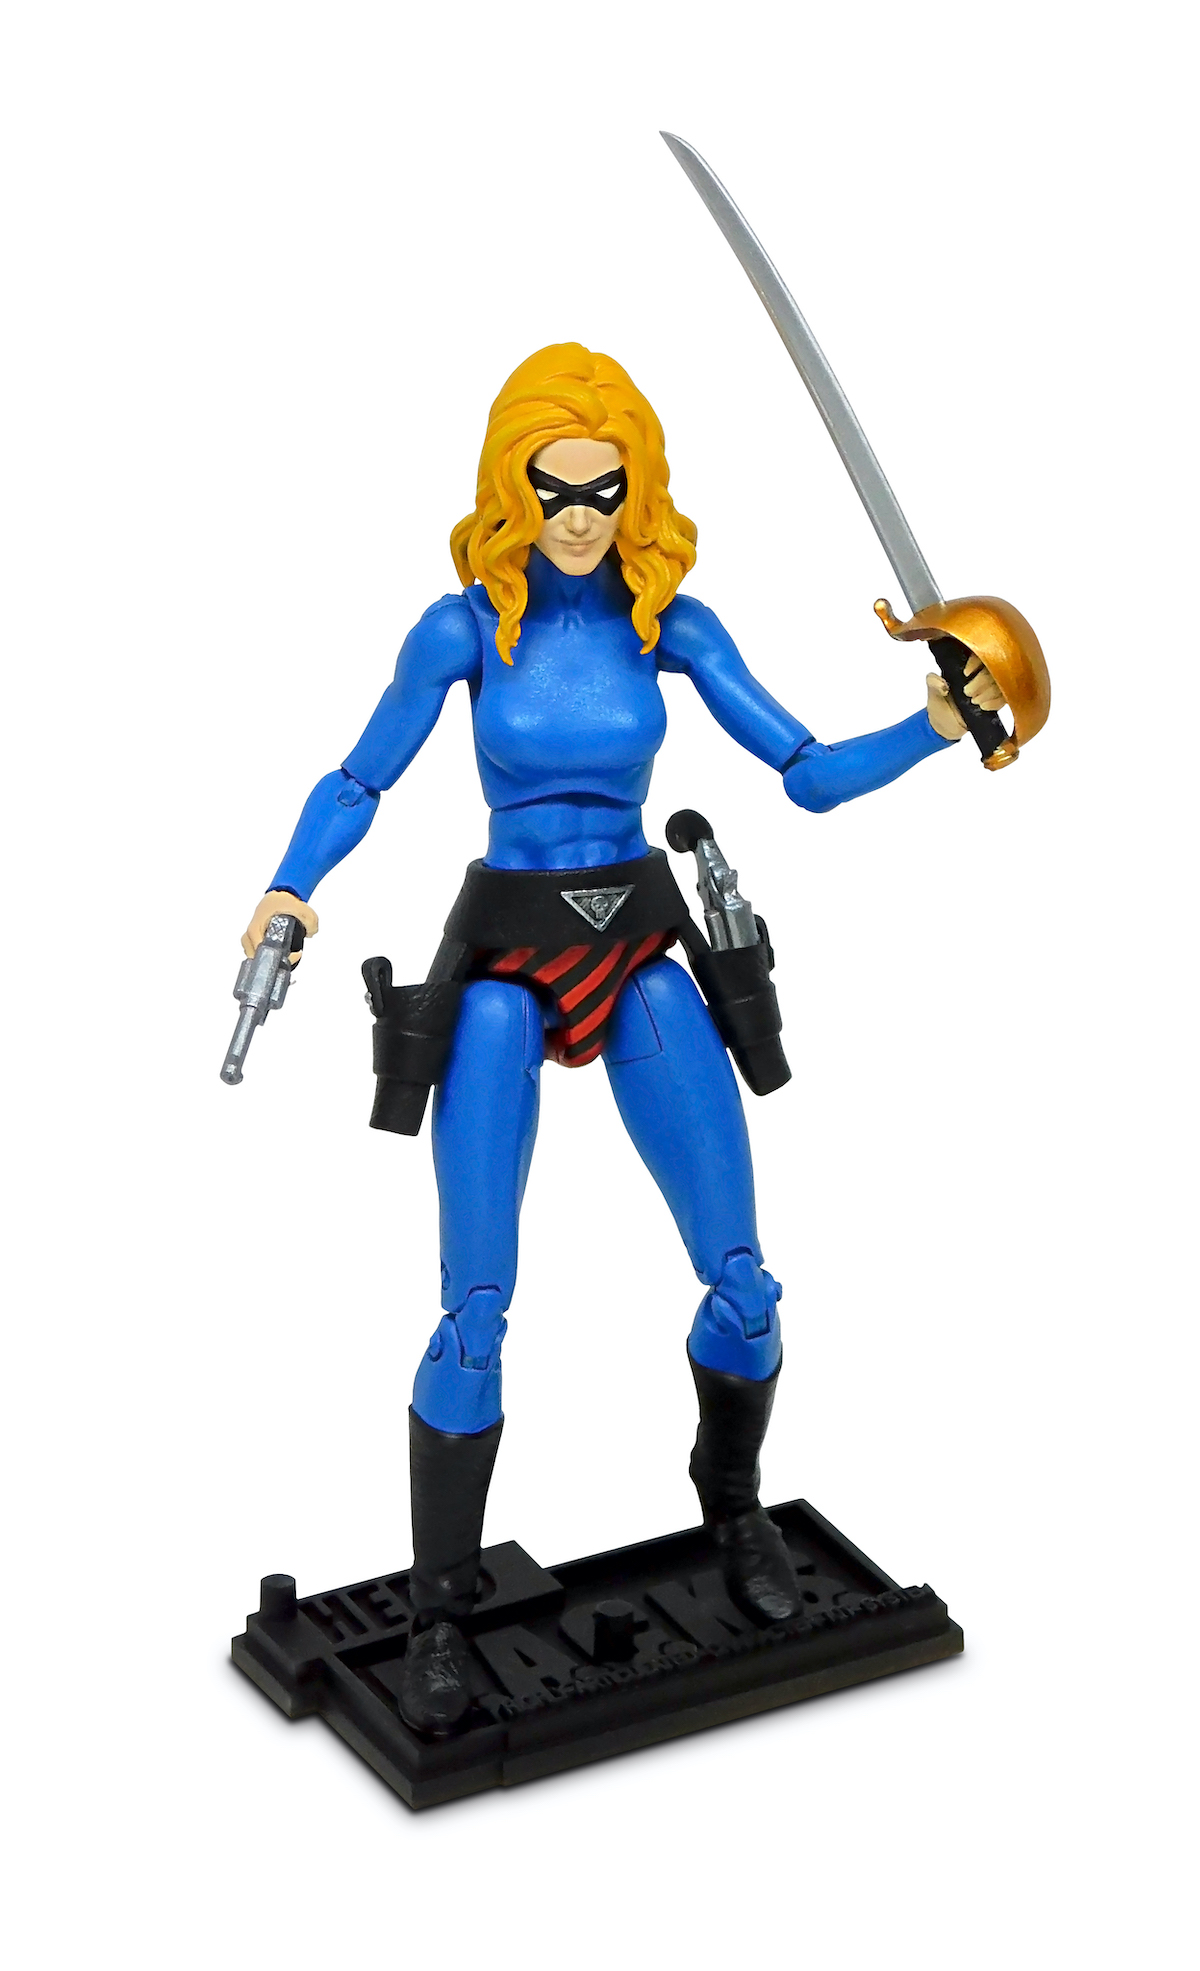 Julie from the Phantom line of action figures